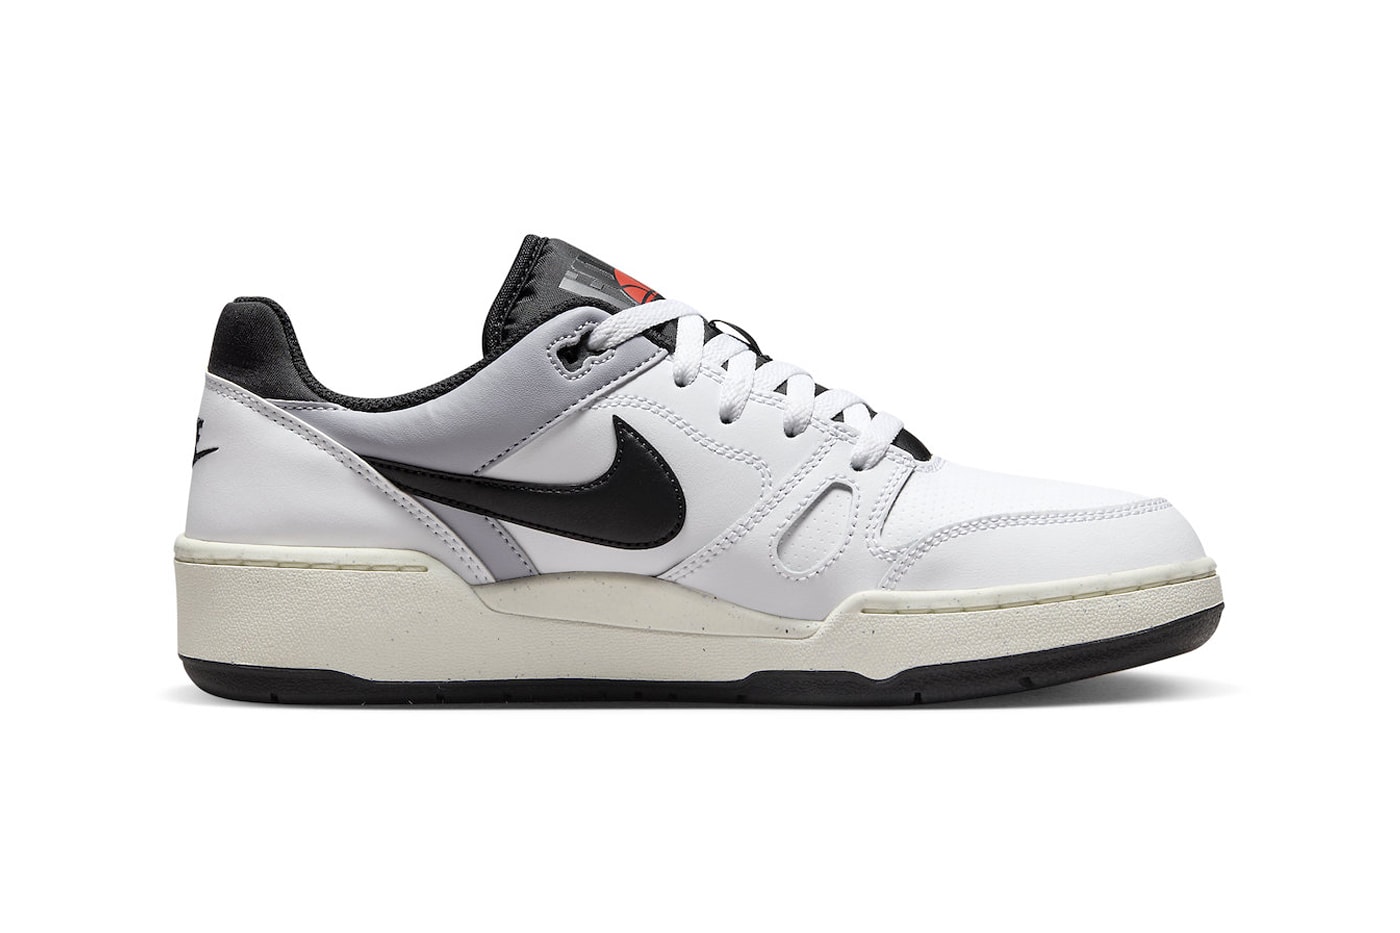 suizo Objetado a tiempo Official Look Nike Full Force Low "White/Black" | Hypebeast